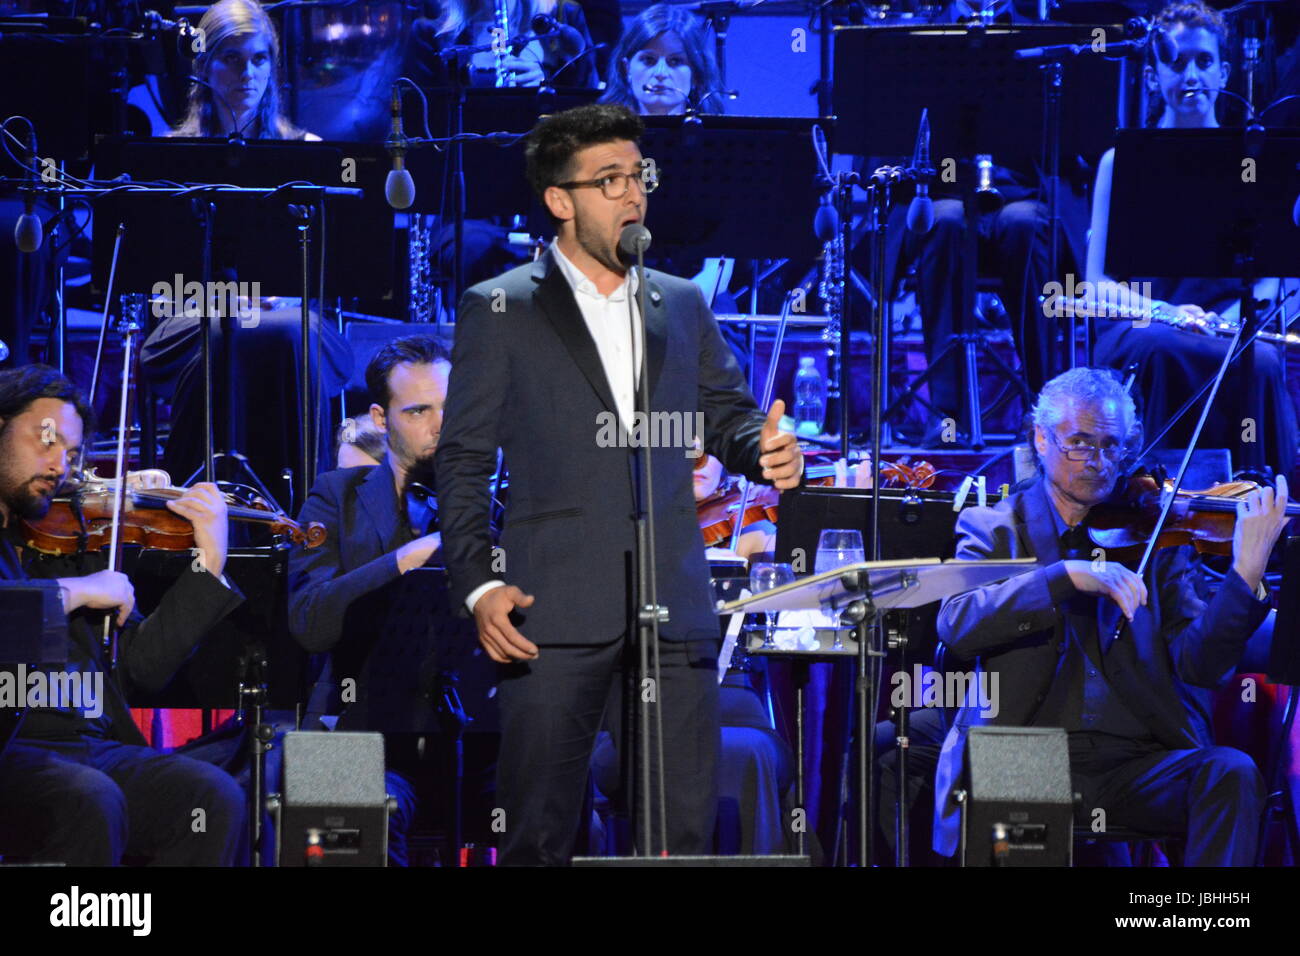 Naples, Italy. 10rd June, 2017. Il Volo performing for the “Notte Magica – A Tribute To The Three Tenors” at ETES Arena Flegrea, Naples, Italy Credit: Mariano Montella/Pacific Stock Photo